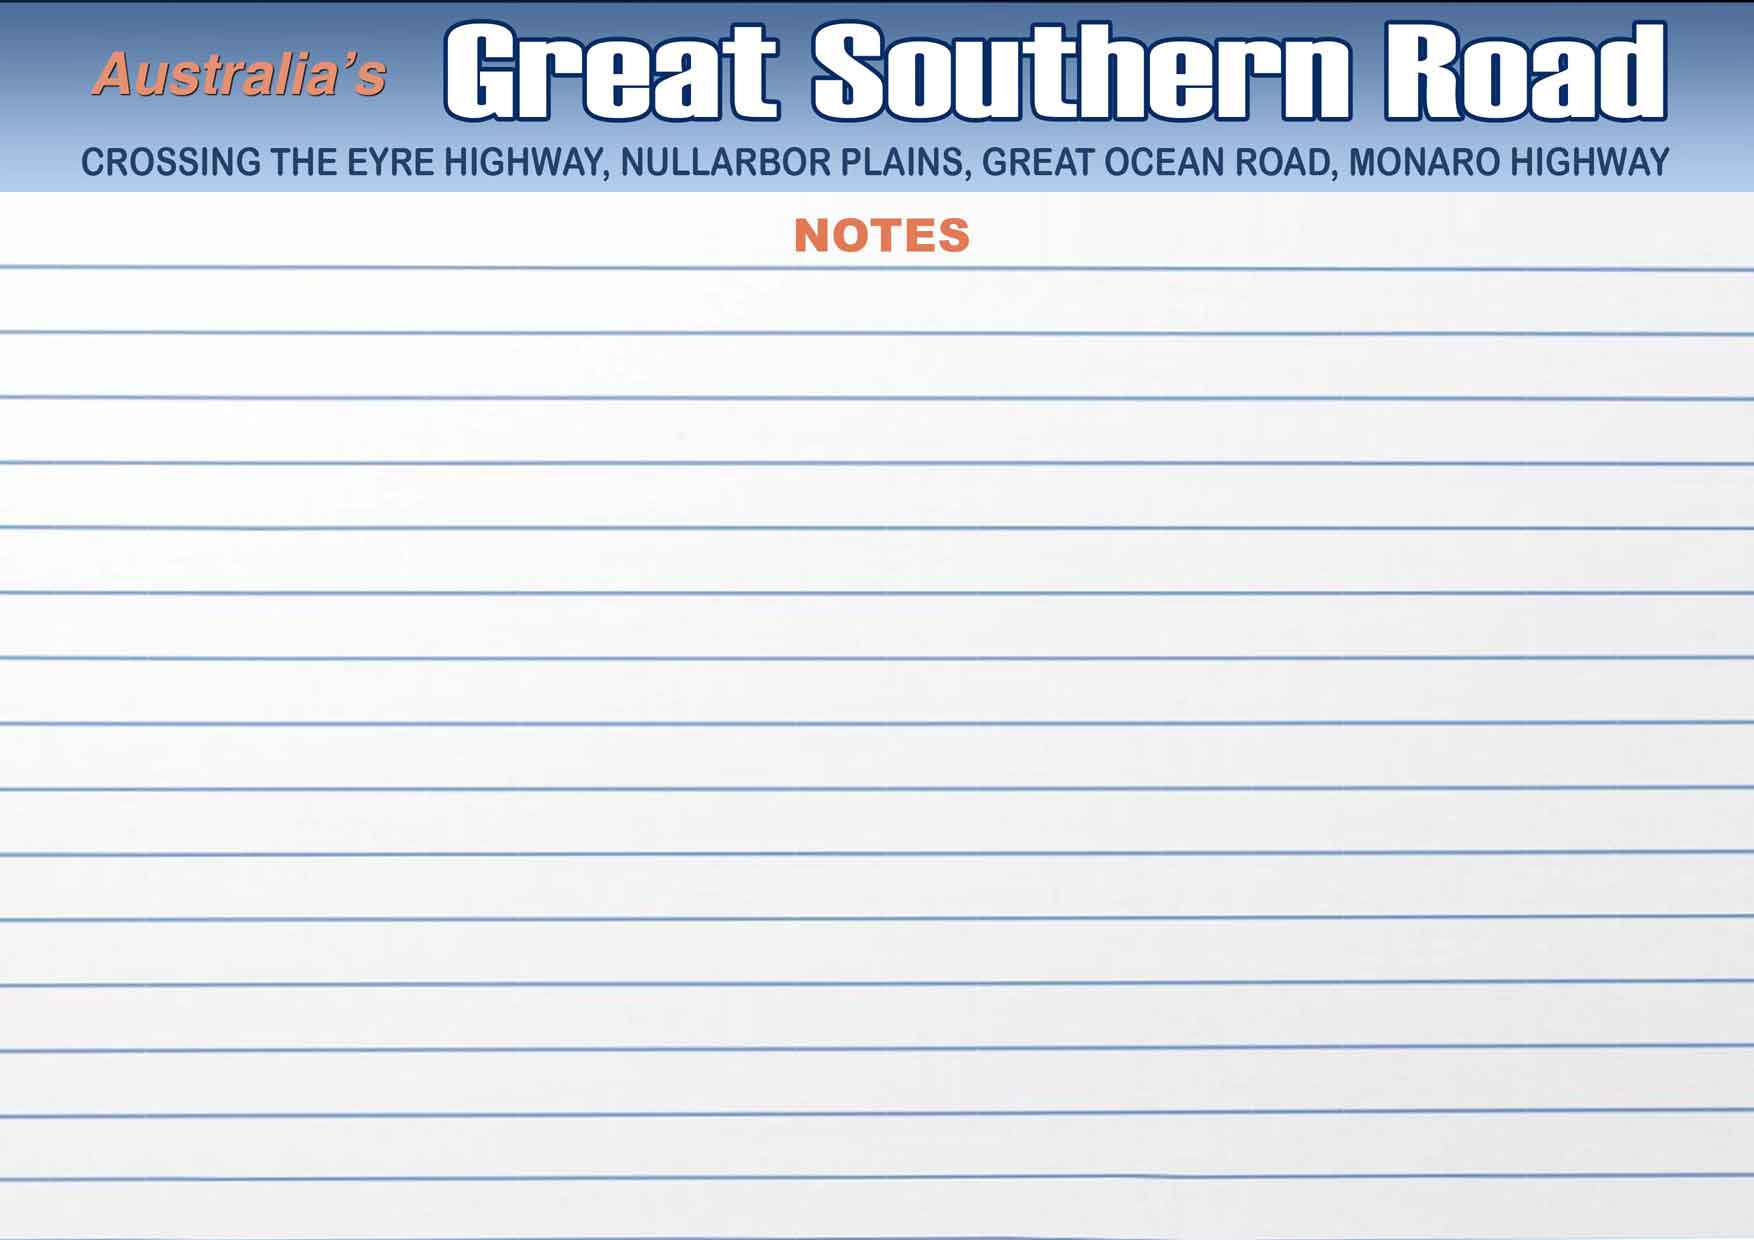 Great Southern Road - NOTES